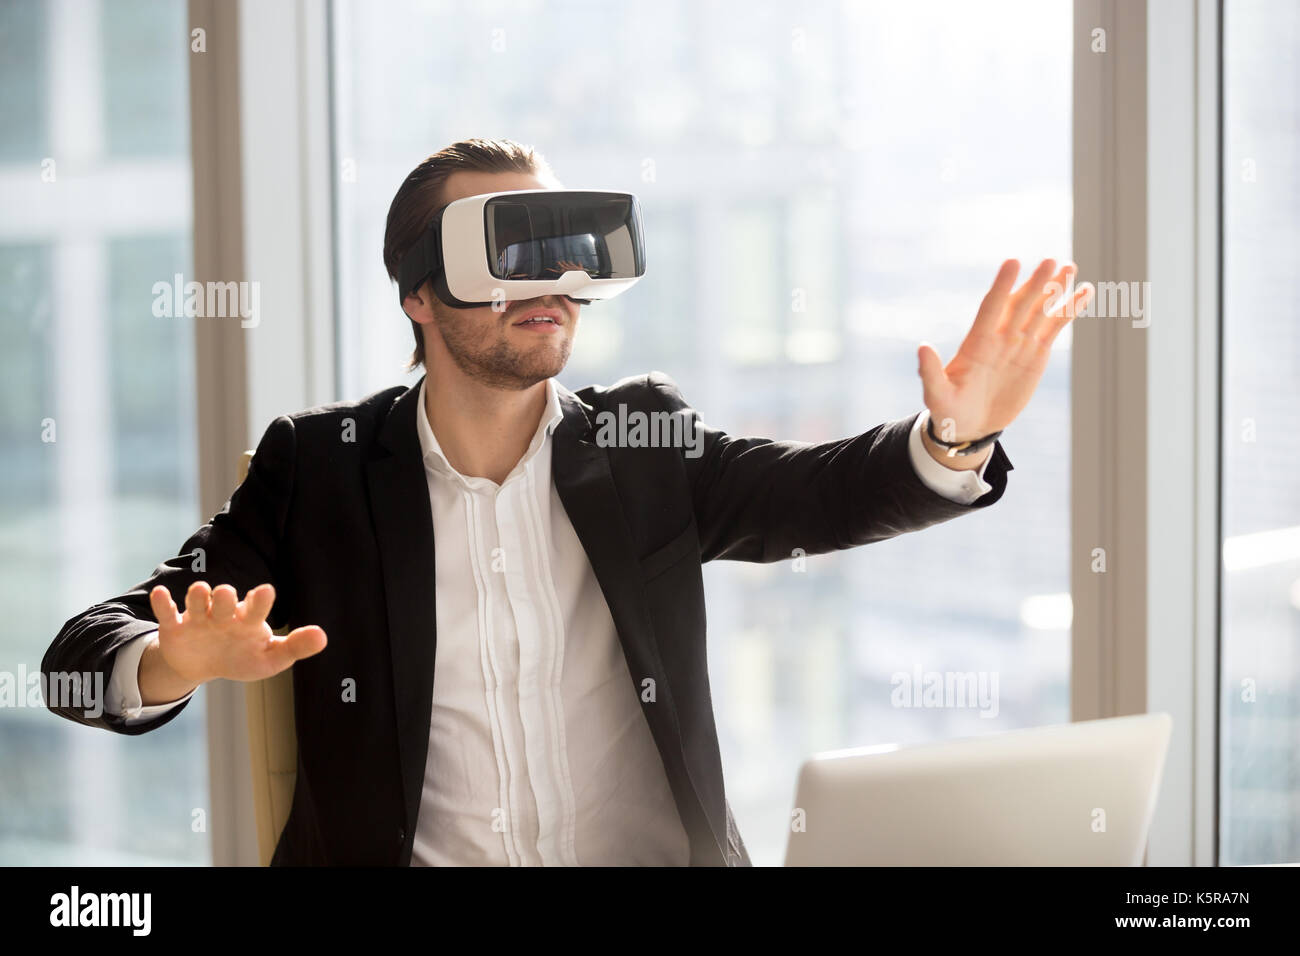 Businessman in vr headset touching air immersed in virtual reali Stock Photo